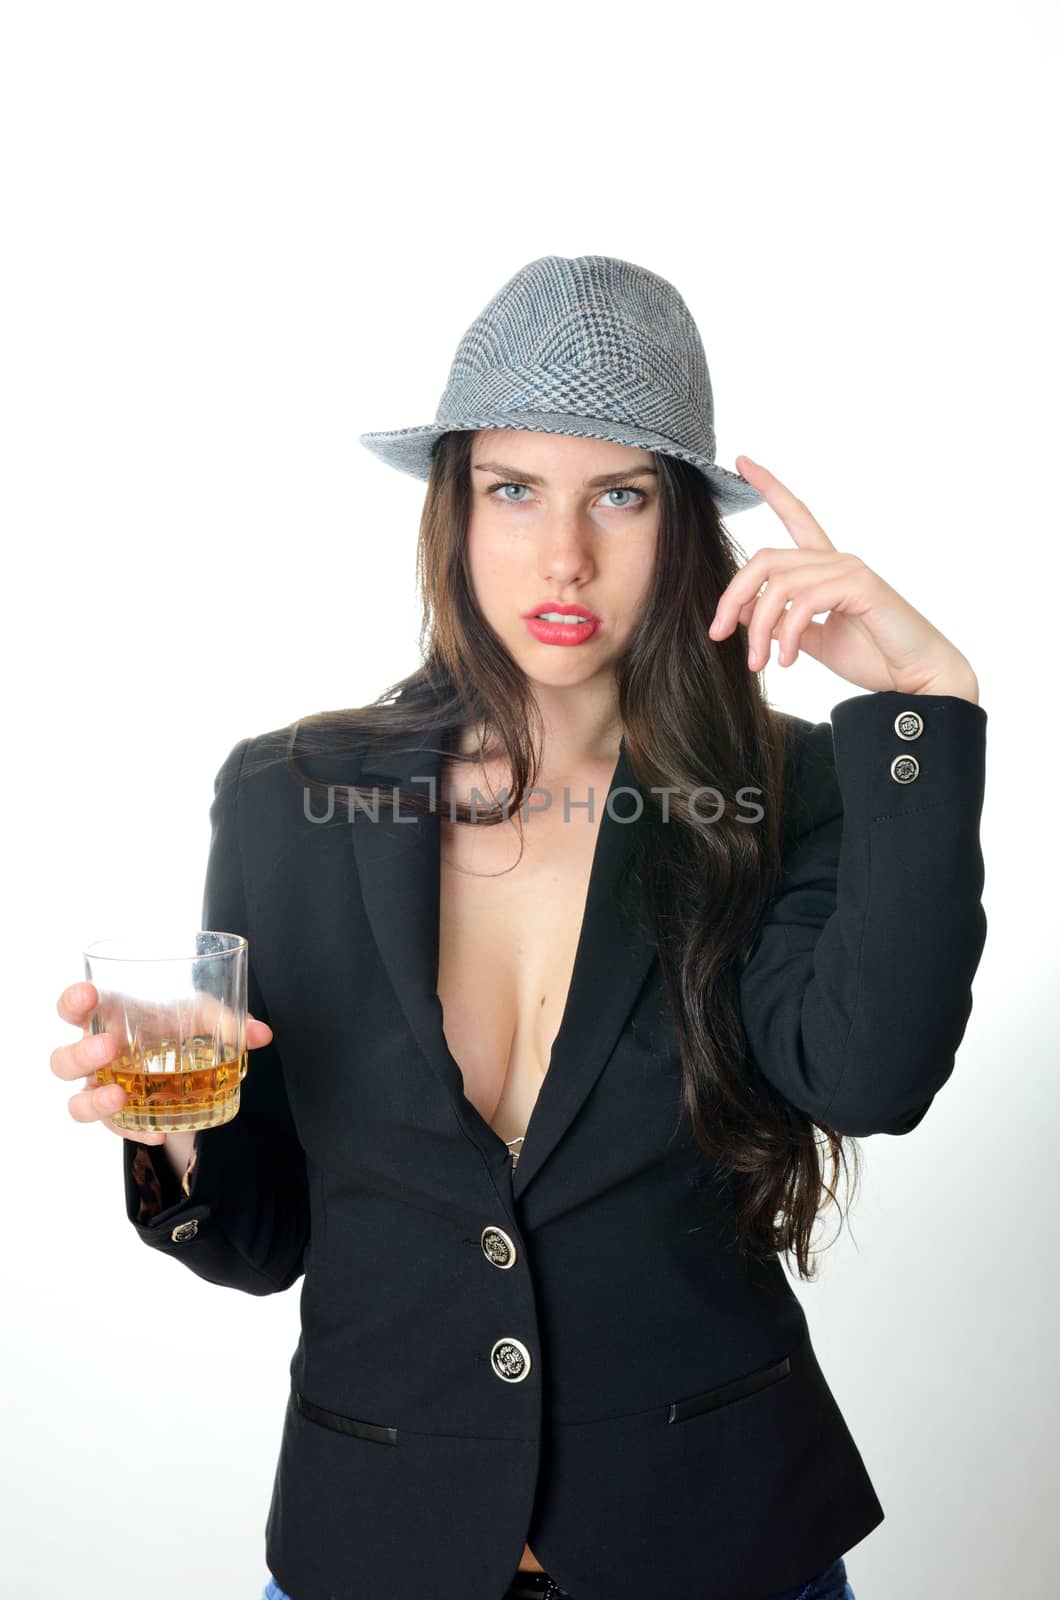 Girl holds glass with drink. Young female model puts dark tail-coat and classic hat.